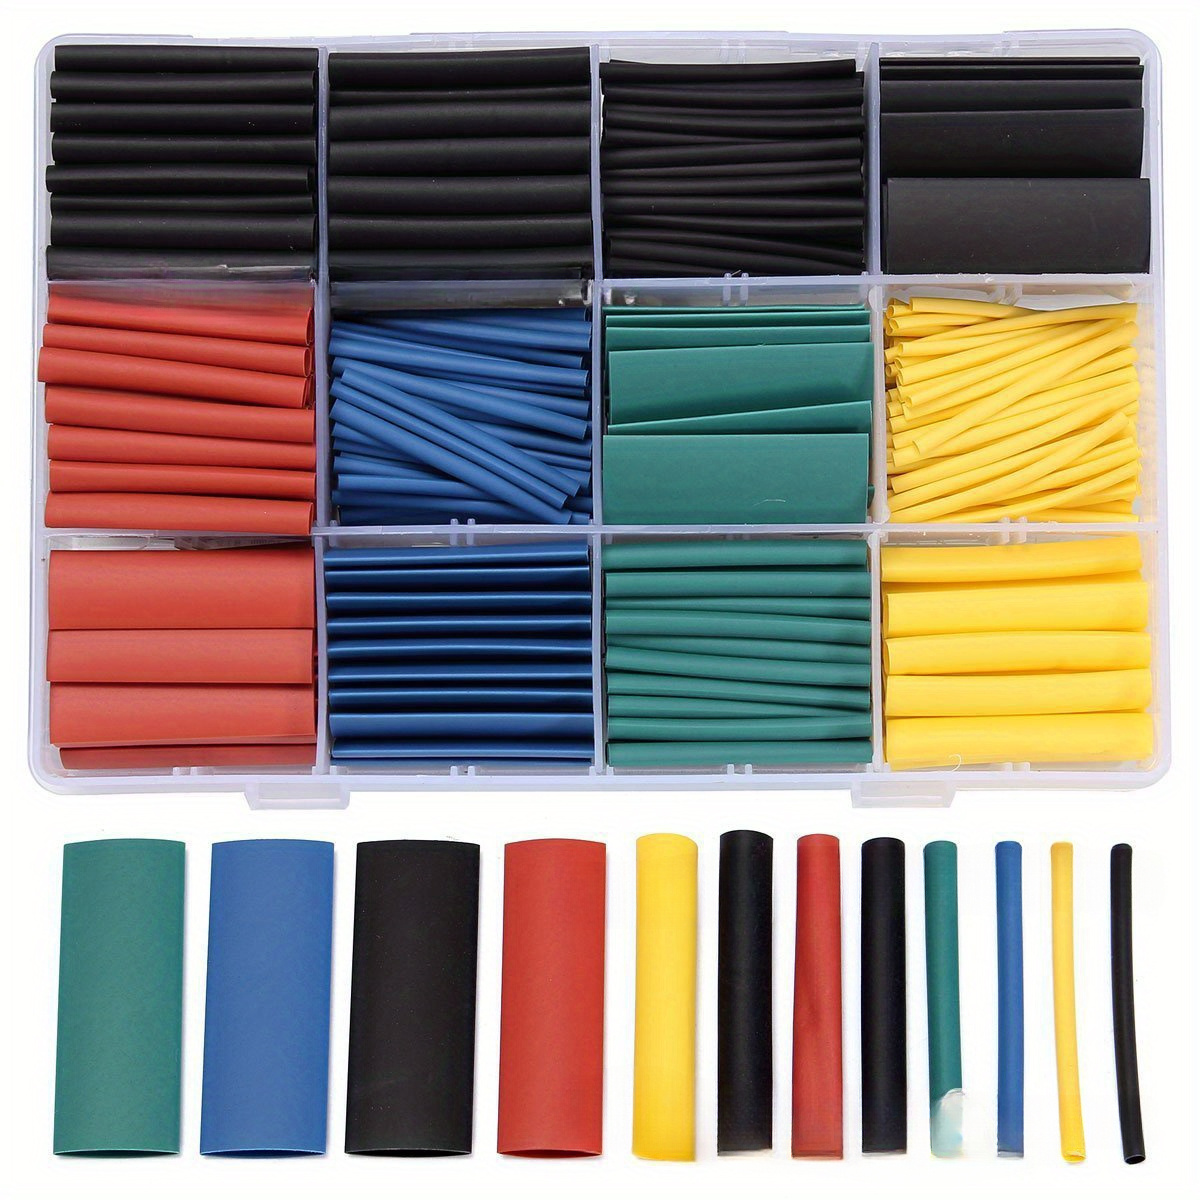 

530pcs Multi-color Heat Shrinkable Tube Electrical Wire Data Wire Insulation Shrinkable Tube Bags And Boxes